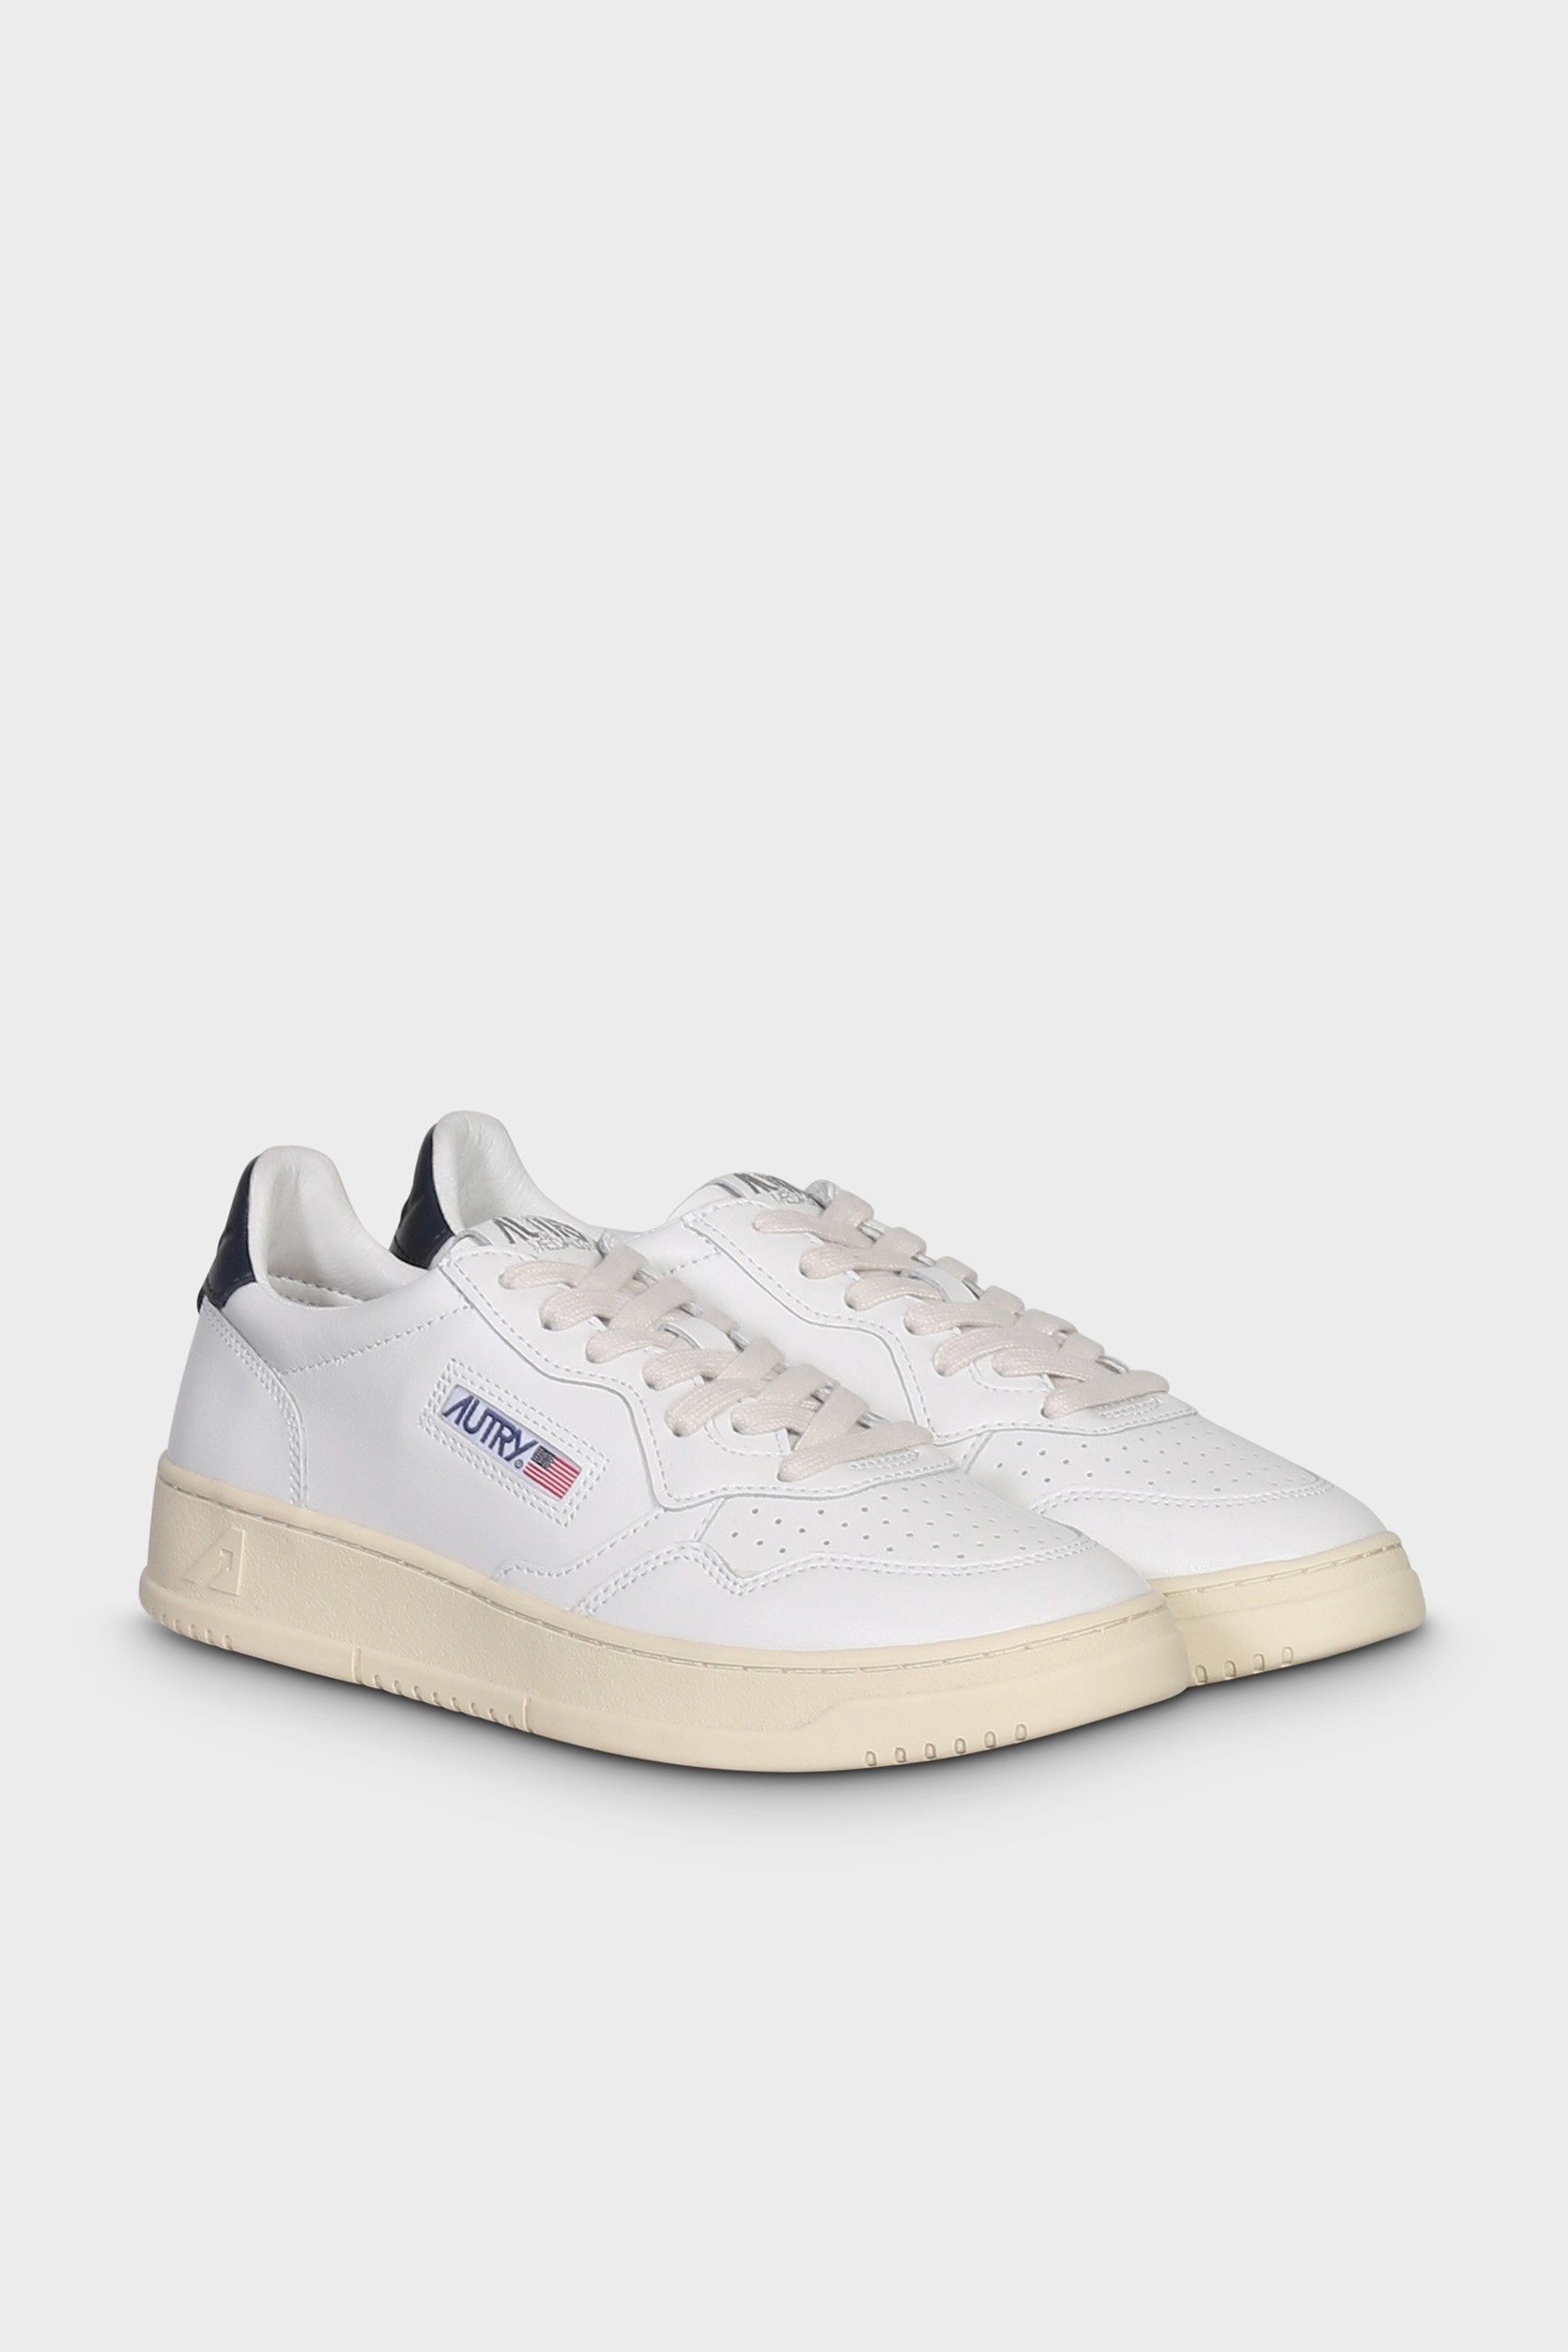 AUTRY ACTION SHOES Sneaker Low in White/Malachi Green 35